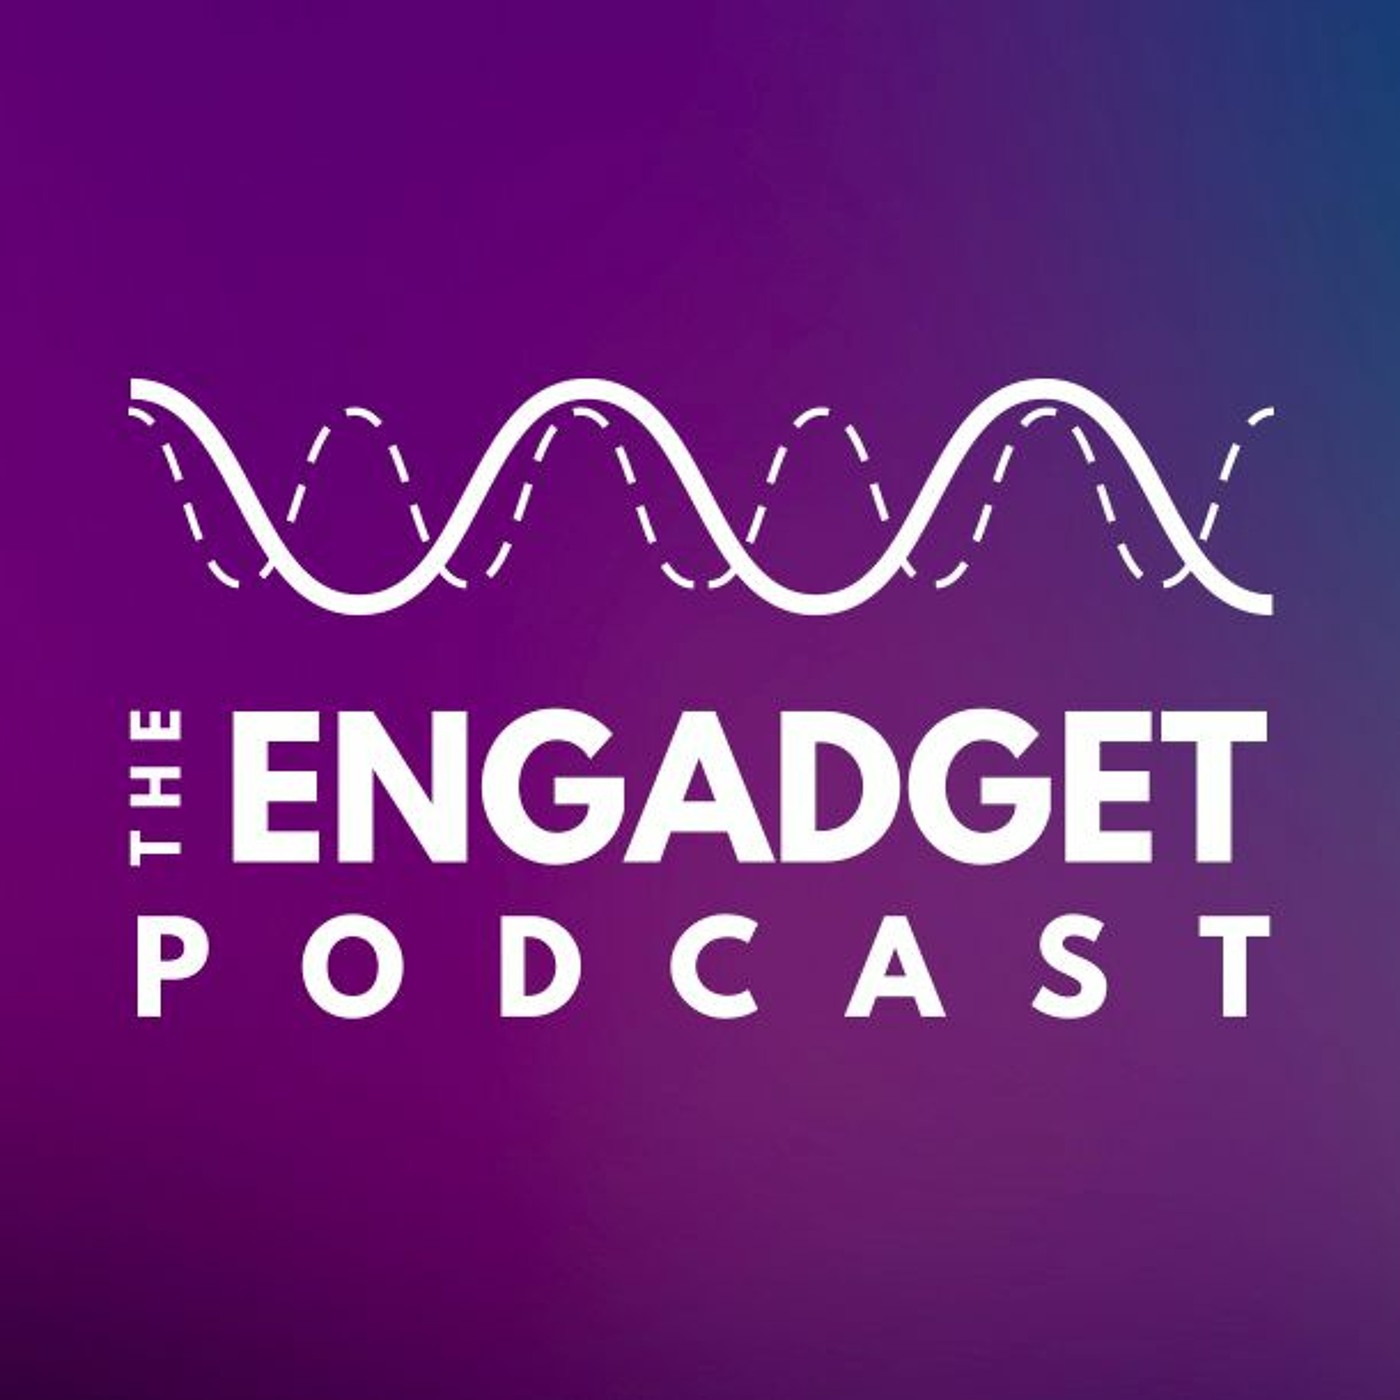 The Engadget Podcast Ep 18: We Both Go Down Together